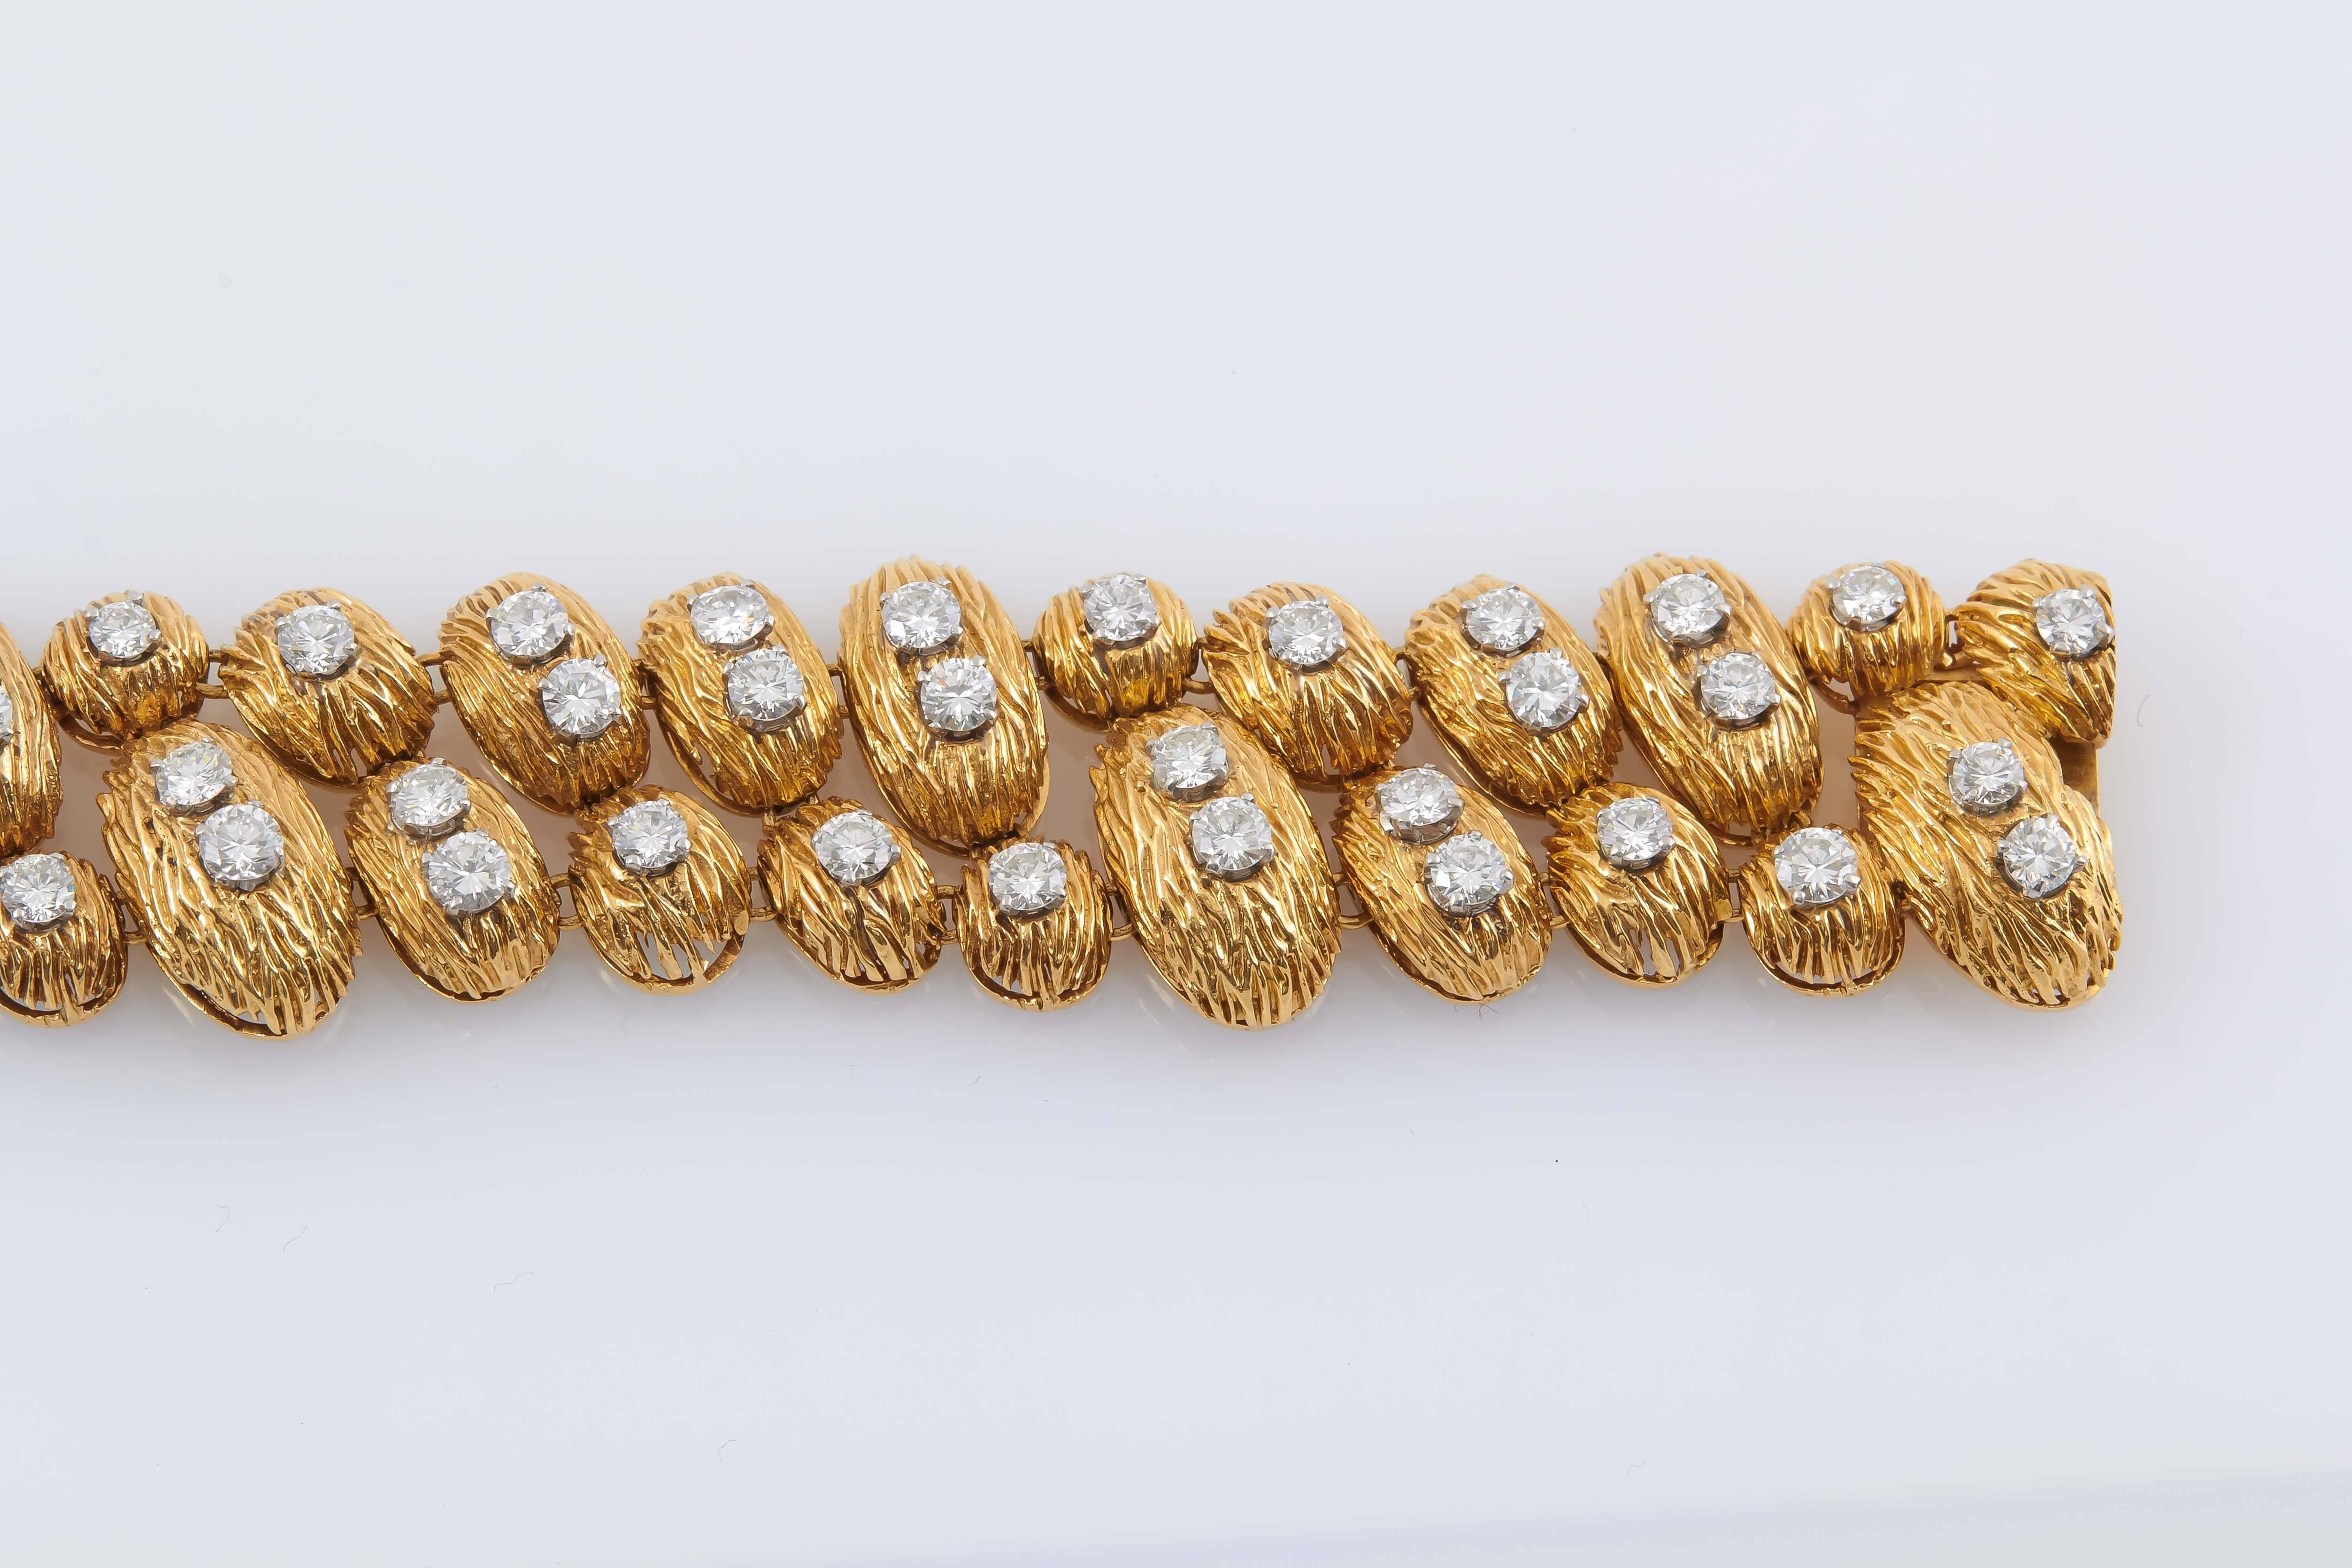 Vintage Van Cleef & Arpels 18K yellow gold bracelet with diamonds totaling approximately 7.50 carats.  